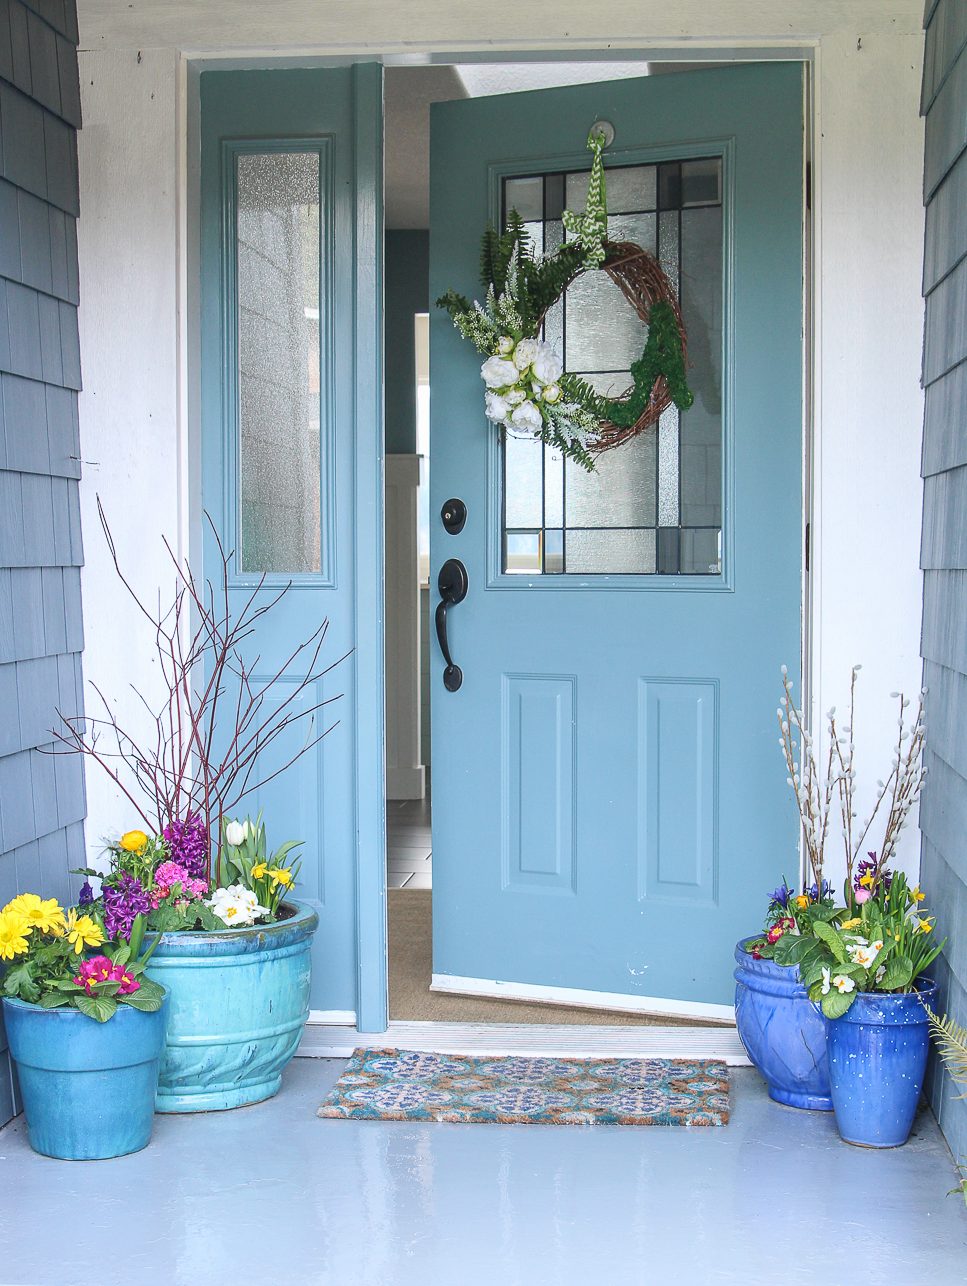 There is a light blue front door to the home ajar.